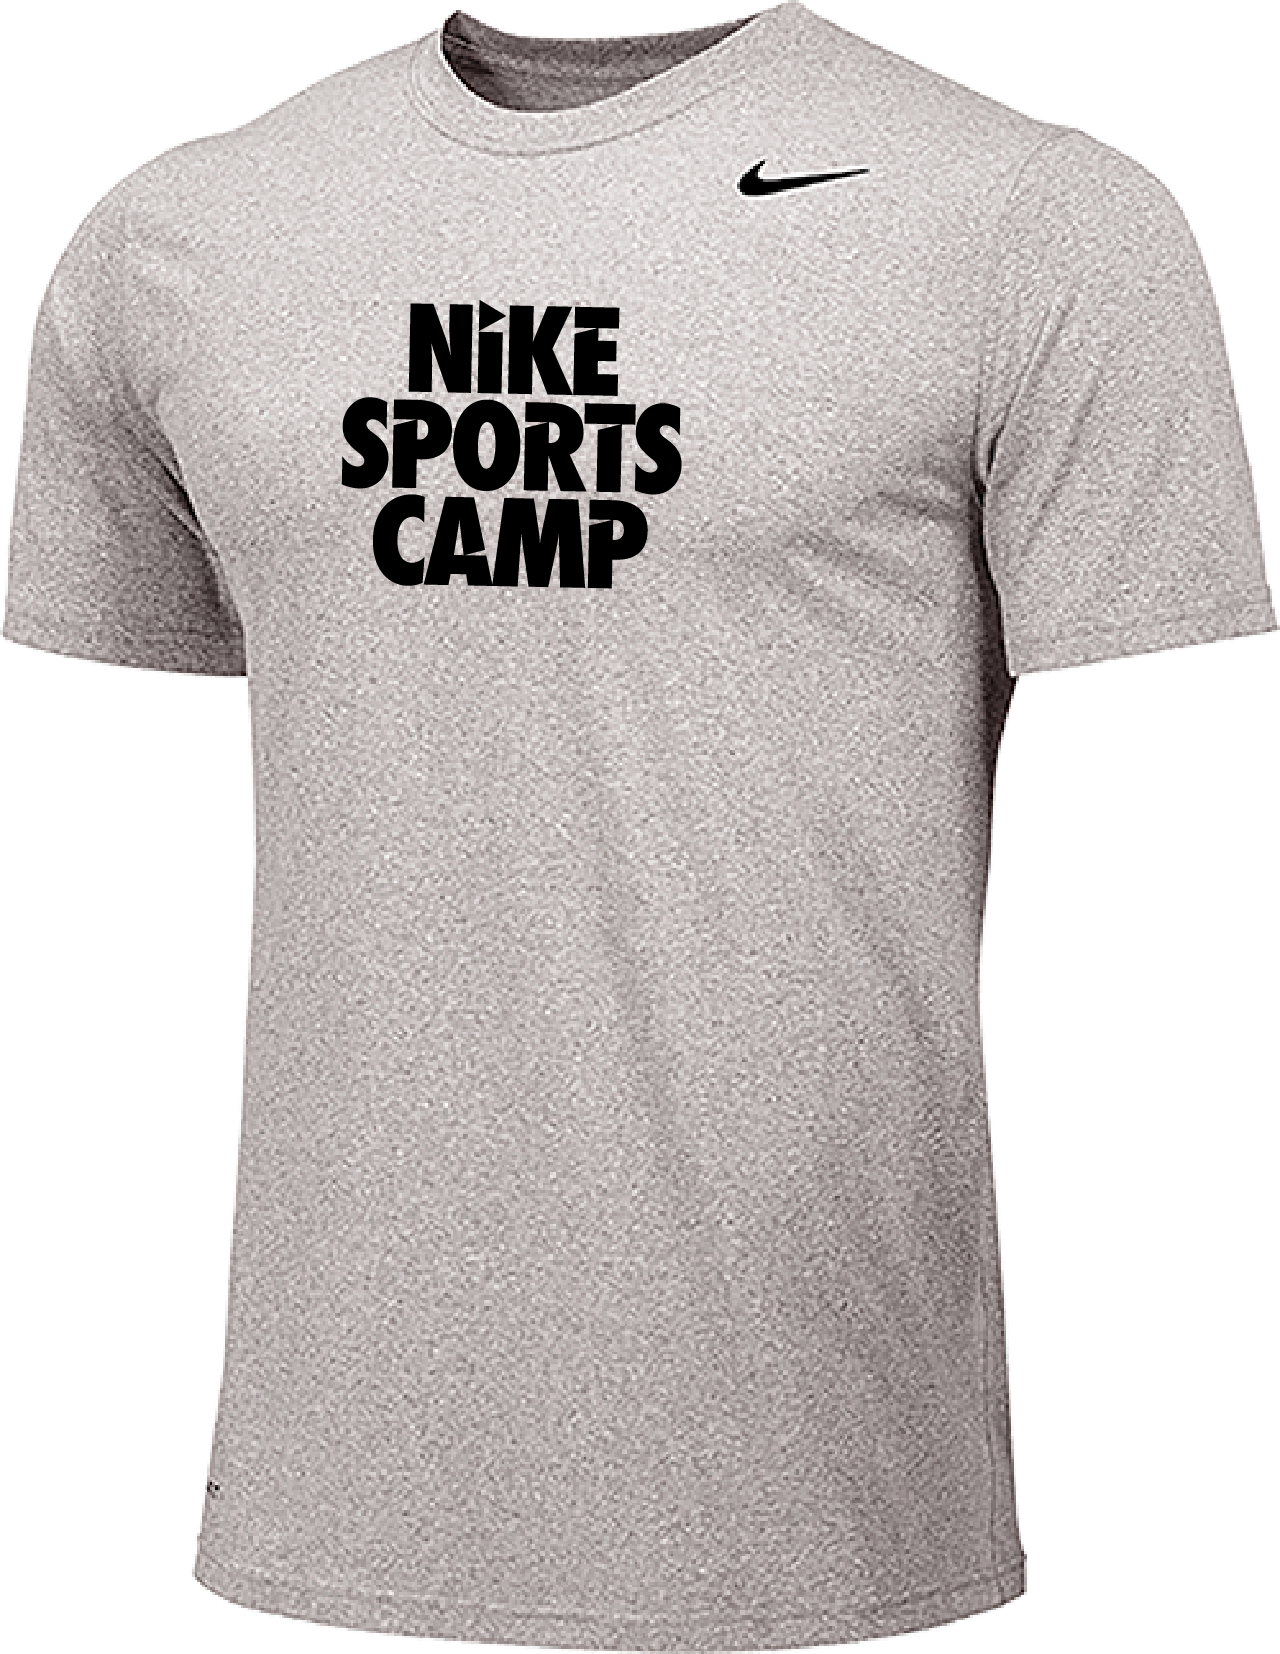 Nike Sports Camps Short Sleeve Dri-Fit Tee - Carbon Heather